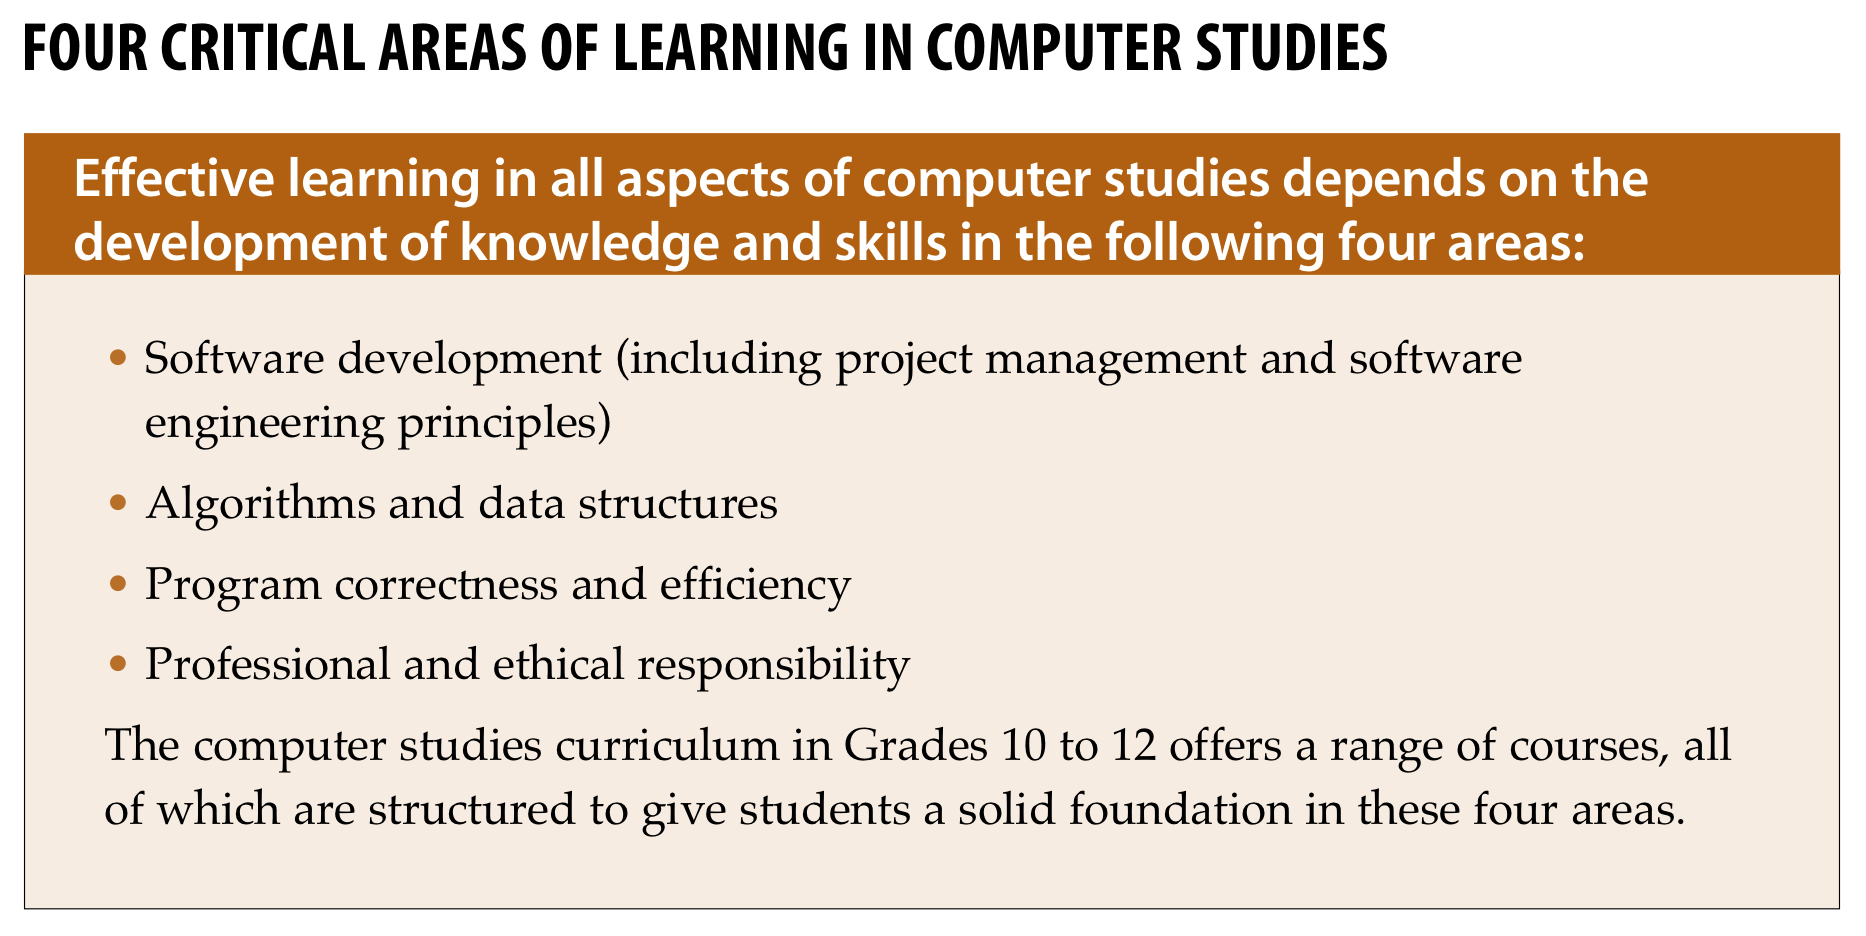 A table describing that 'effective learning in all aspects of computer studies depends on the  development of knowledge and skills in the following four areas.' Those four areas are: 1. Software development (including project management and software engineering principles) 2. Algorithms and data structures 3. Program correctness and efficiency 4. Professional and ethical responsibility